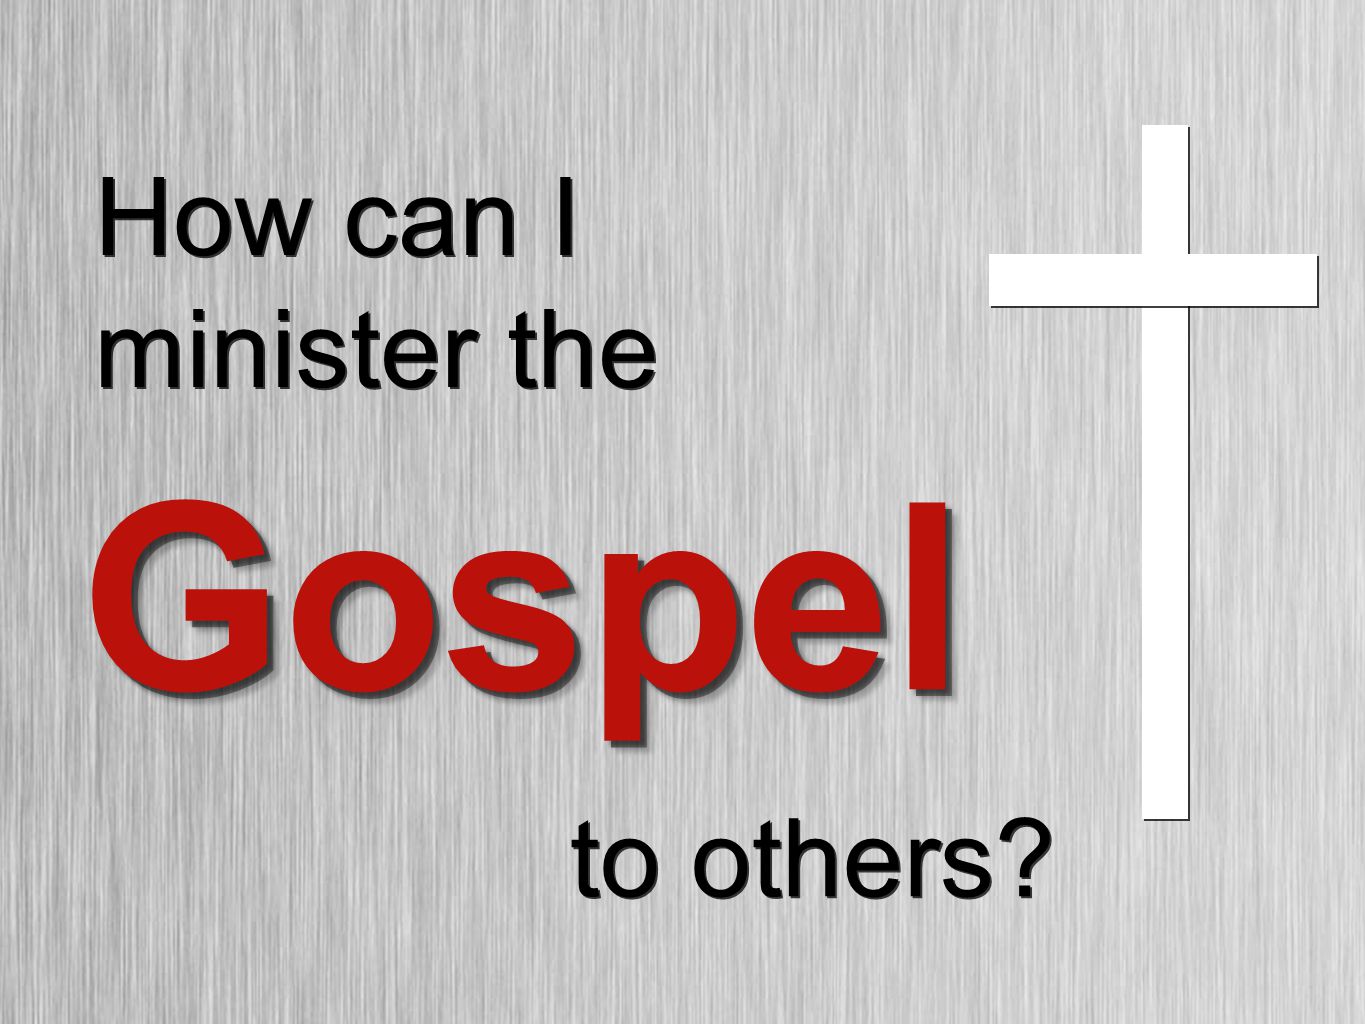 How can I minister the GospelGospel to others